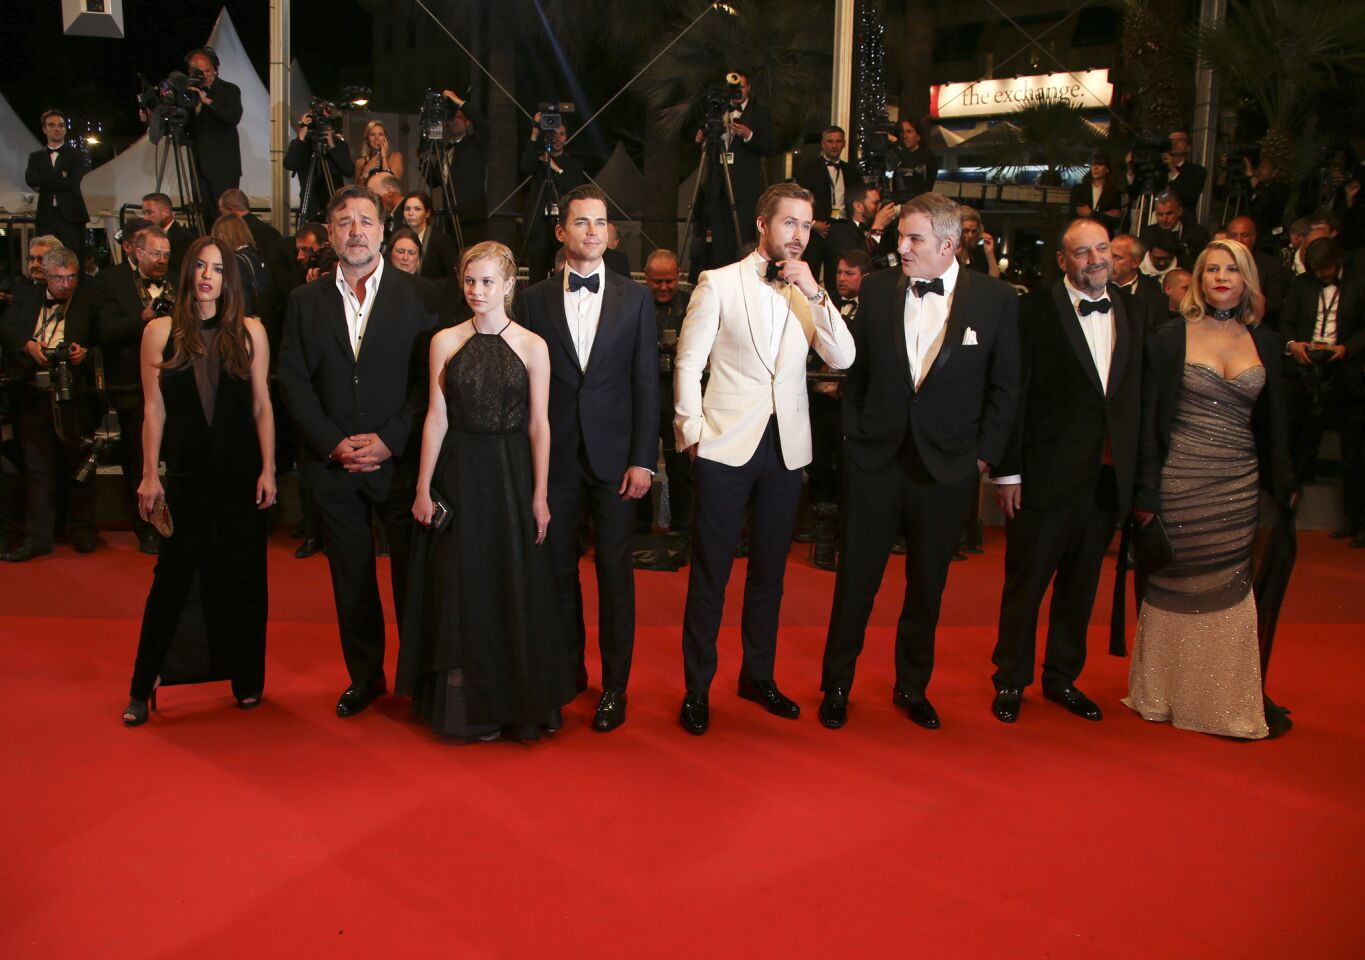 Actors Murielle Telio, left, actor Russell Crowe, actress Angourie Rice, actor Matt Bomer, actor Ryan Gosling, director Shane Black and producer Joel Silver pose upon arrival at the screening of the film "The Nice Guys" at the 69th Cannes Film Festival.